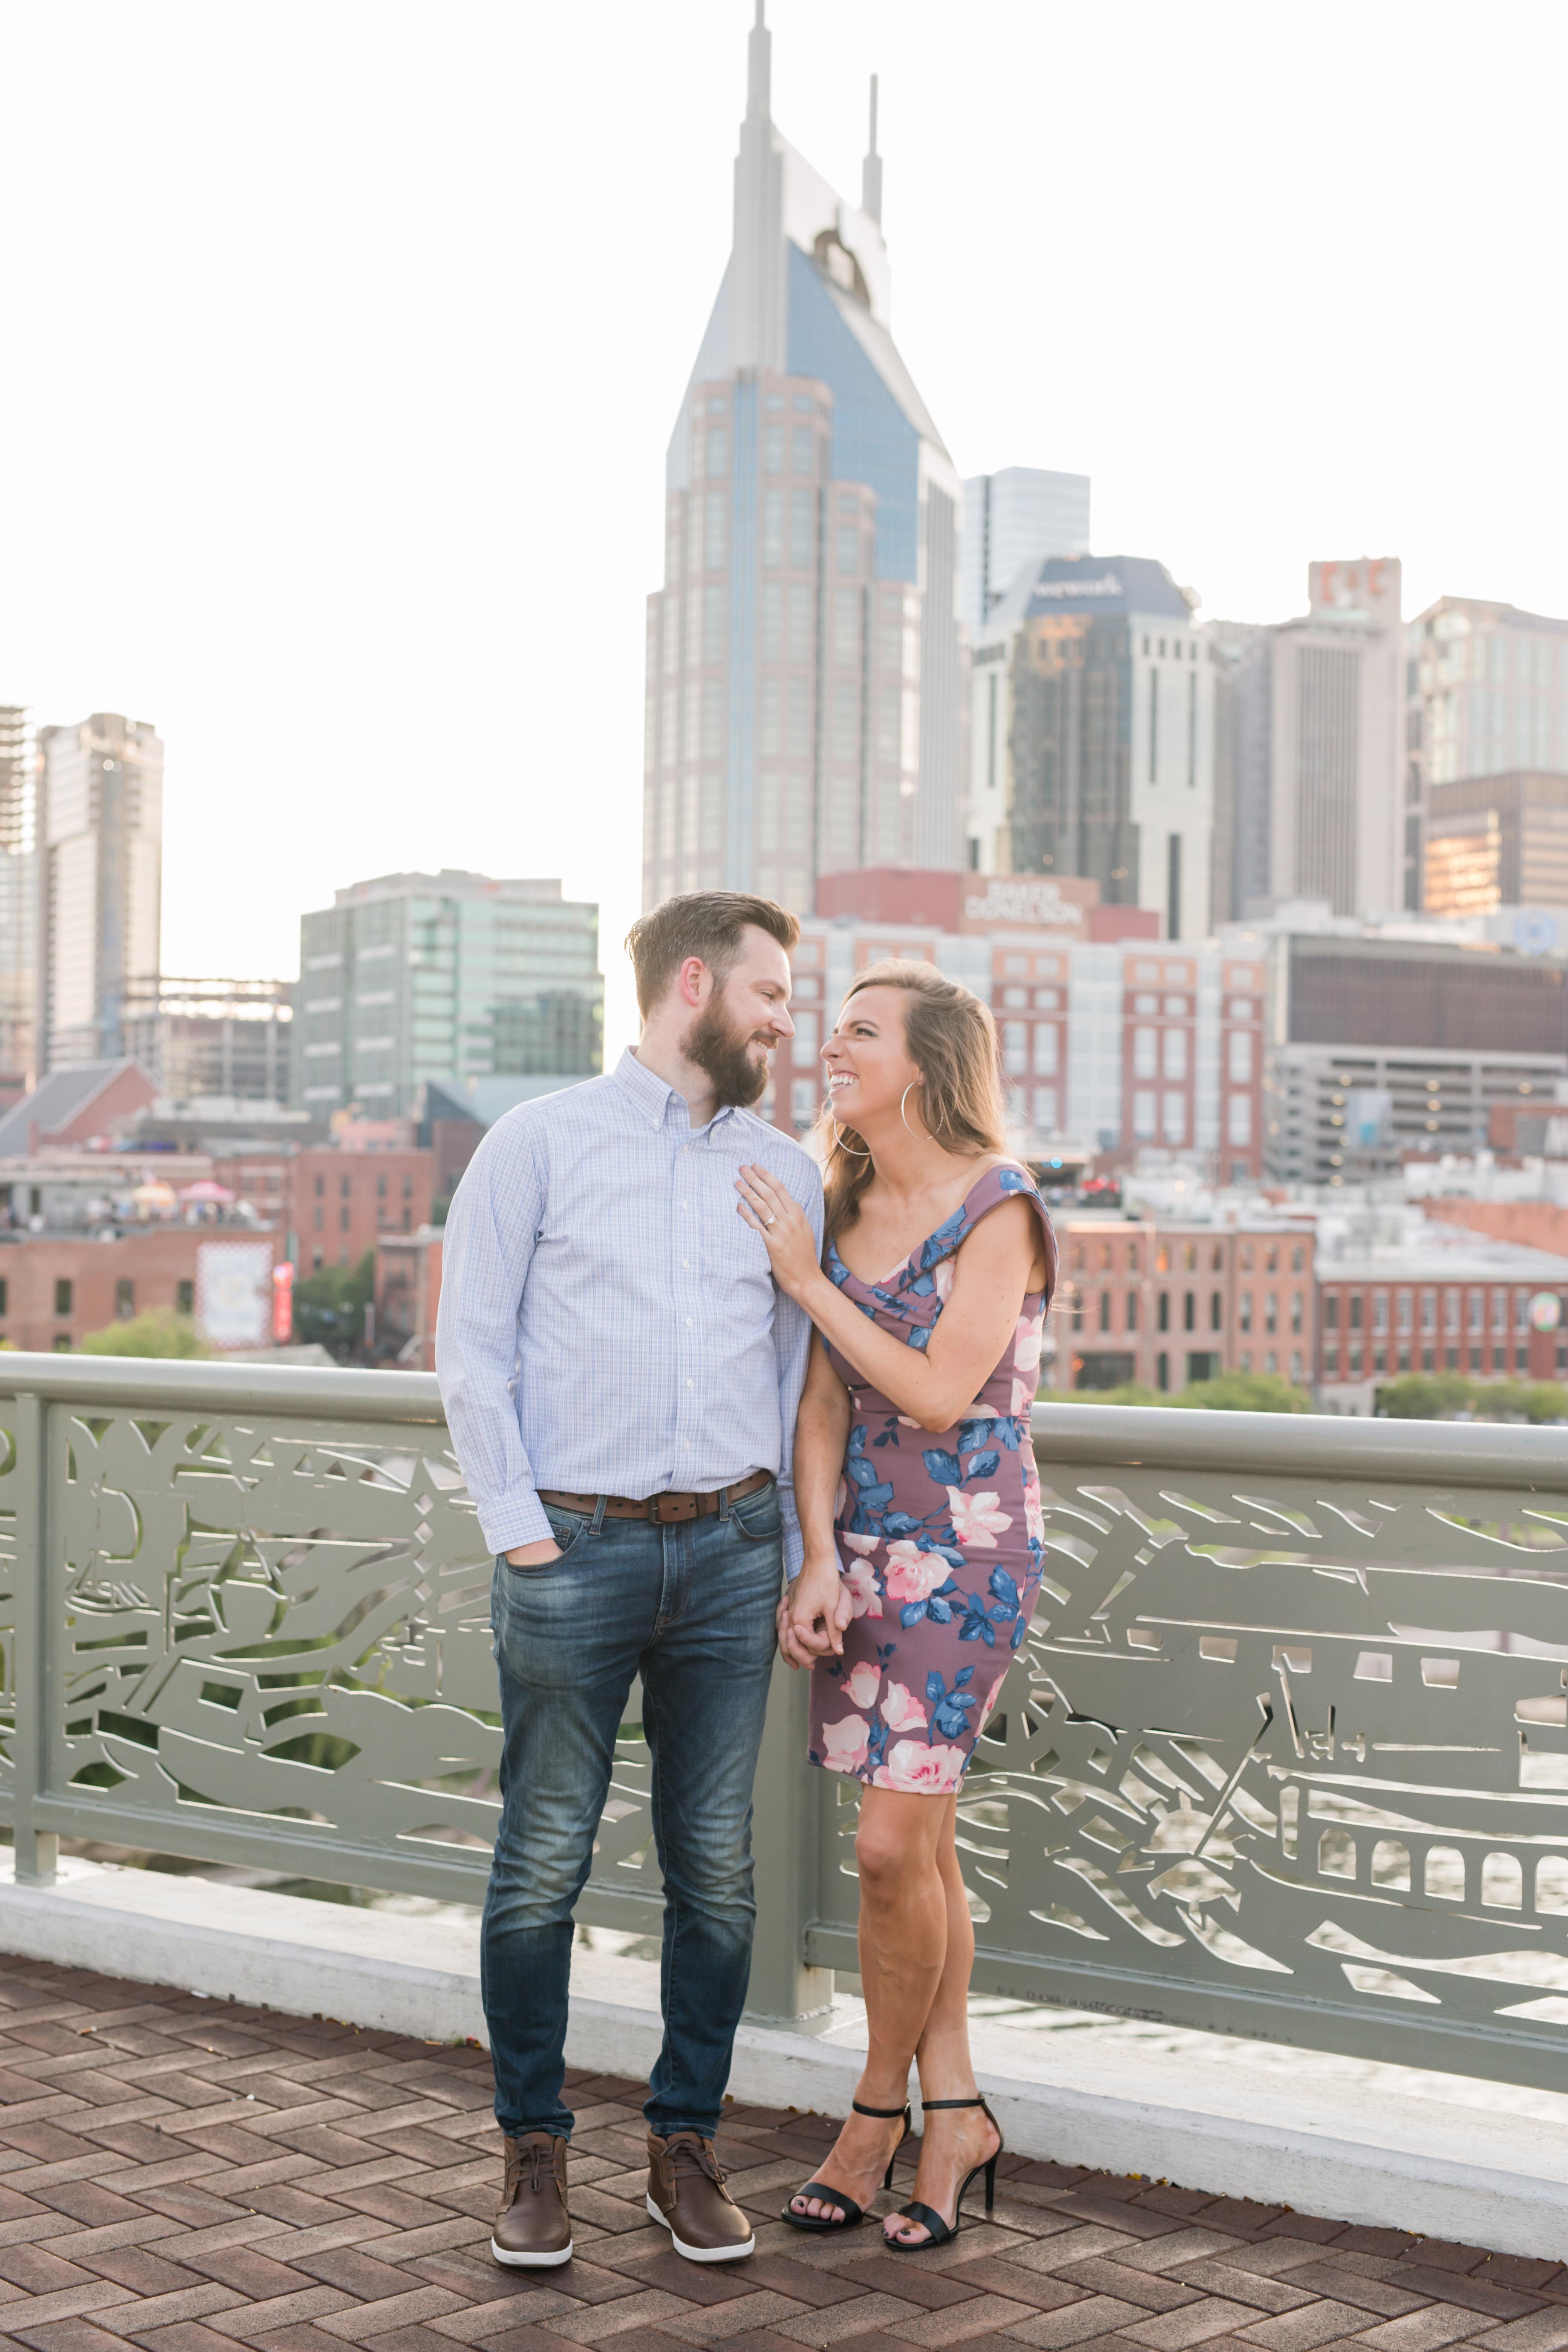 guy and girl looking lovingly at each other nashville skyline